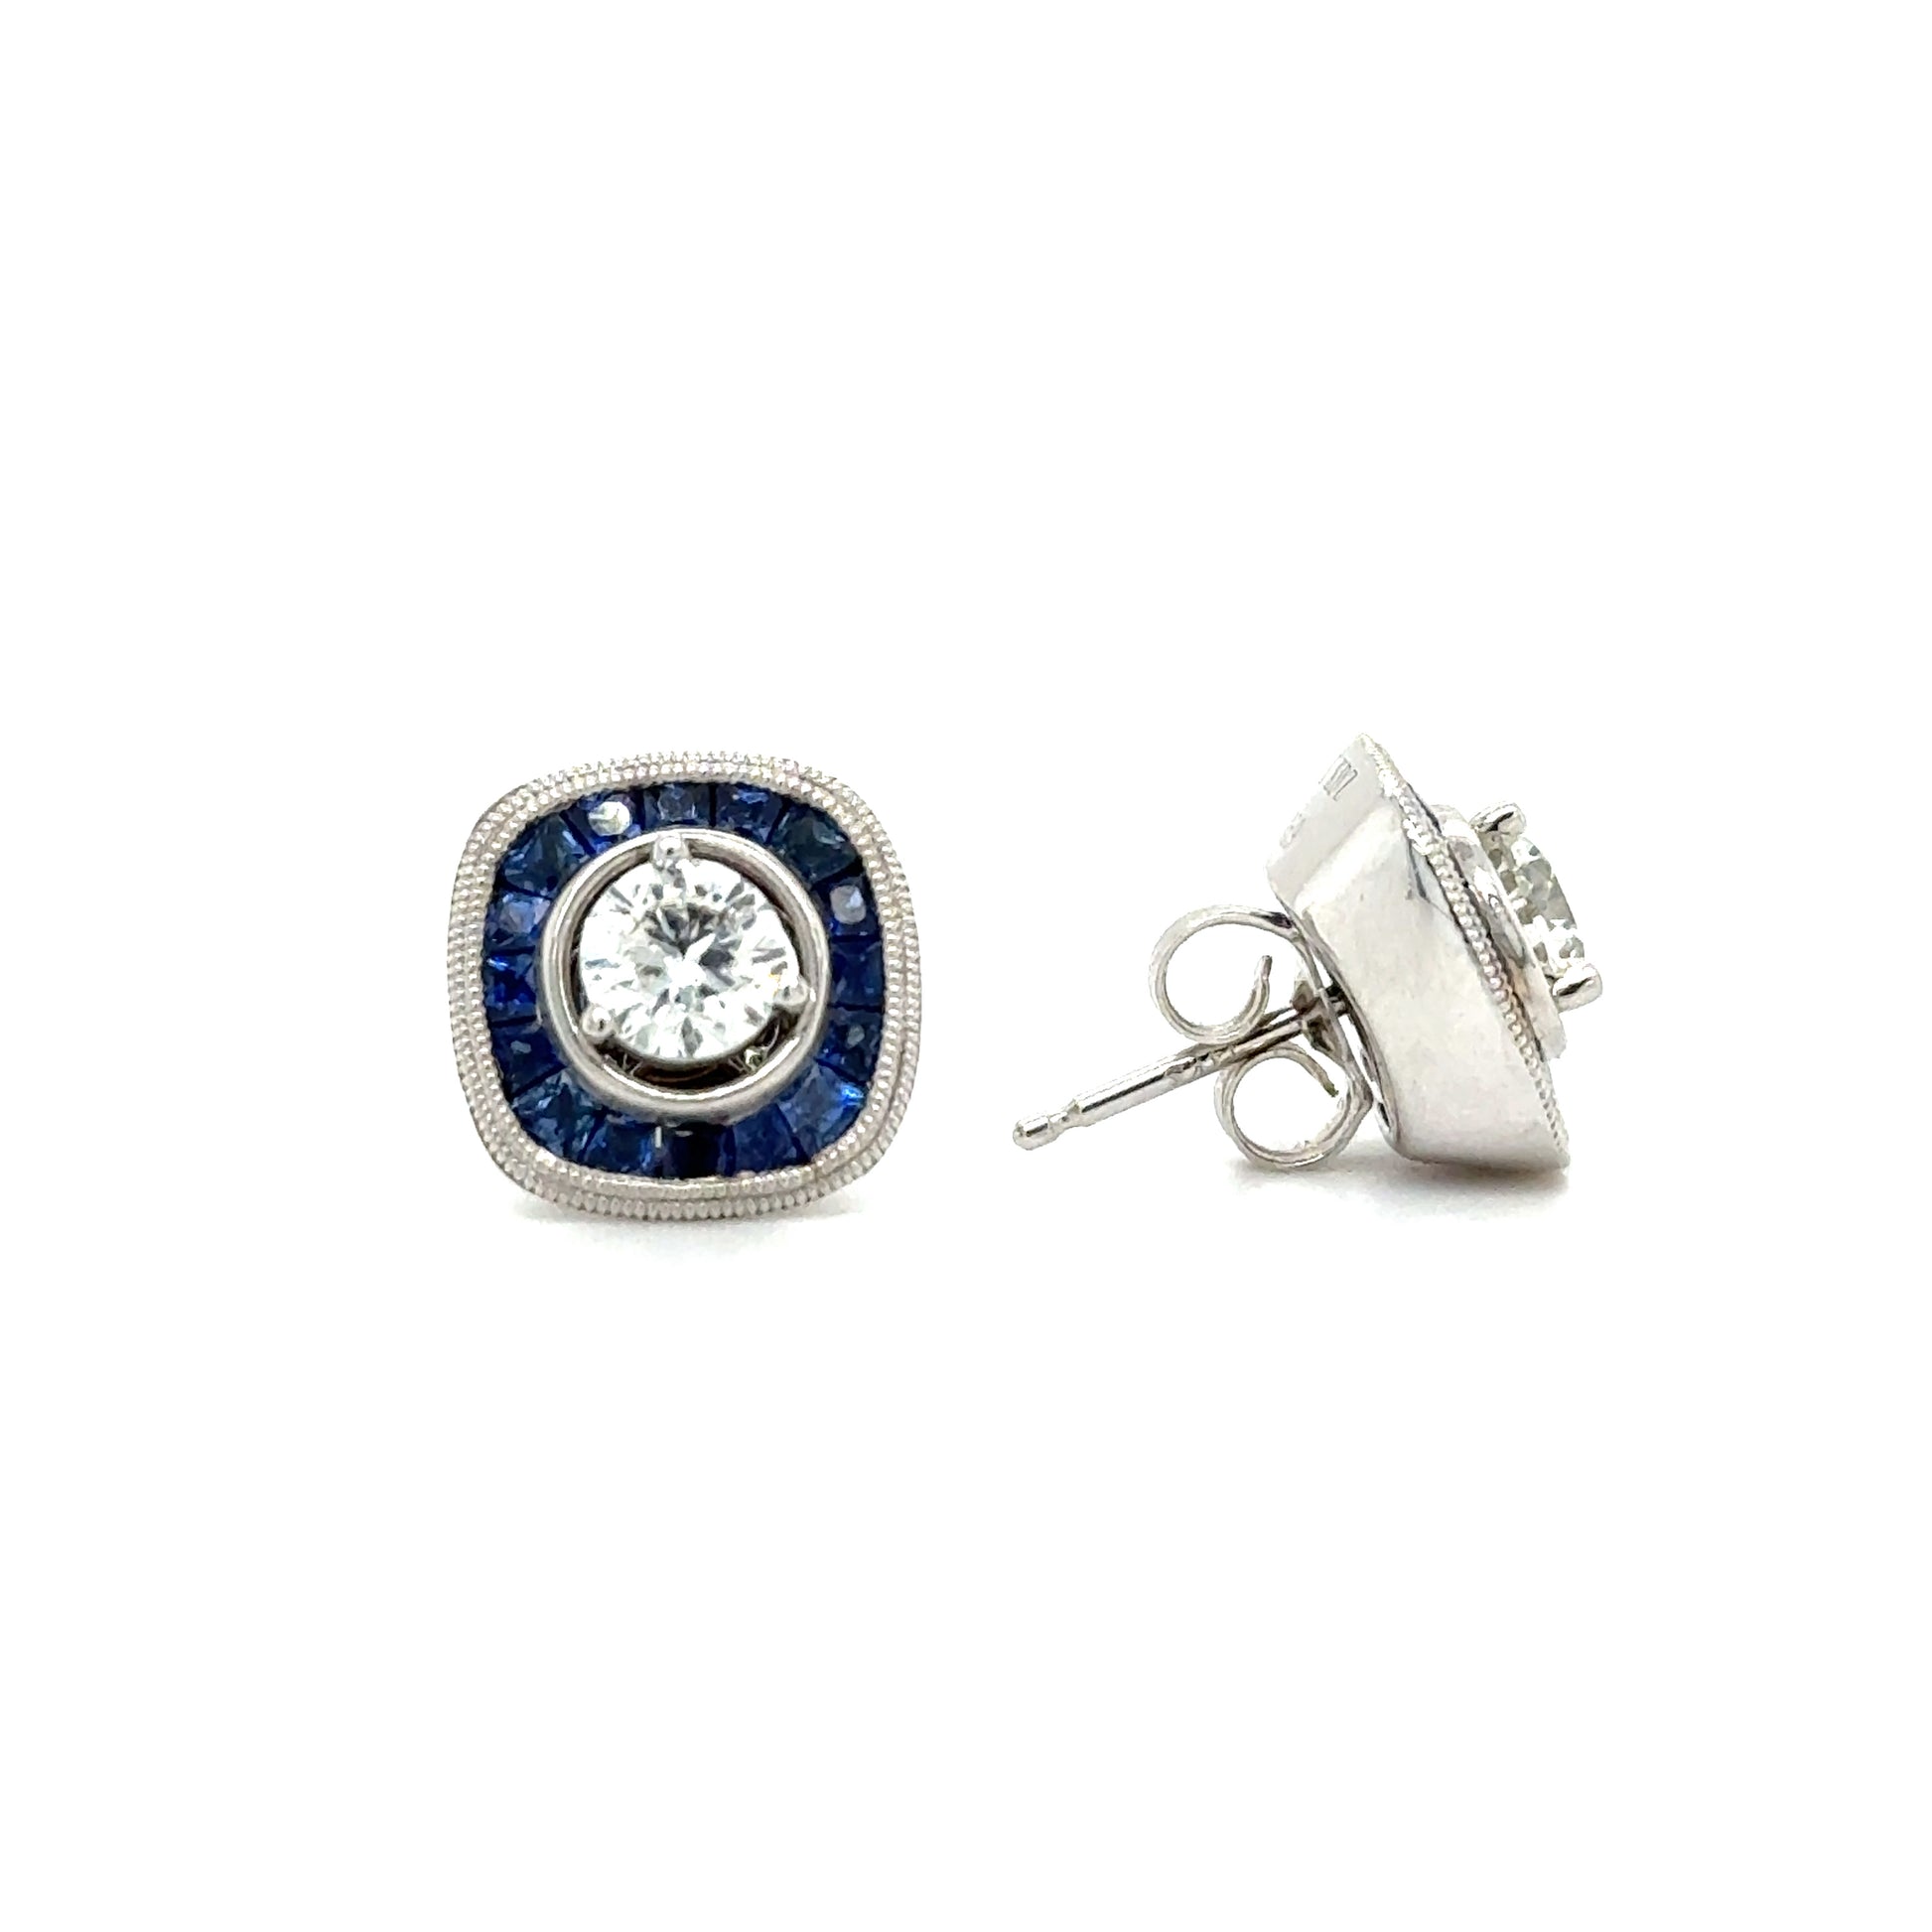 Diamond 0.72ctw Stud Earrings with Blue Sapphire Jackets in 14K White Gold Front and Side View